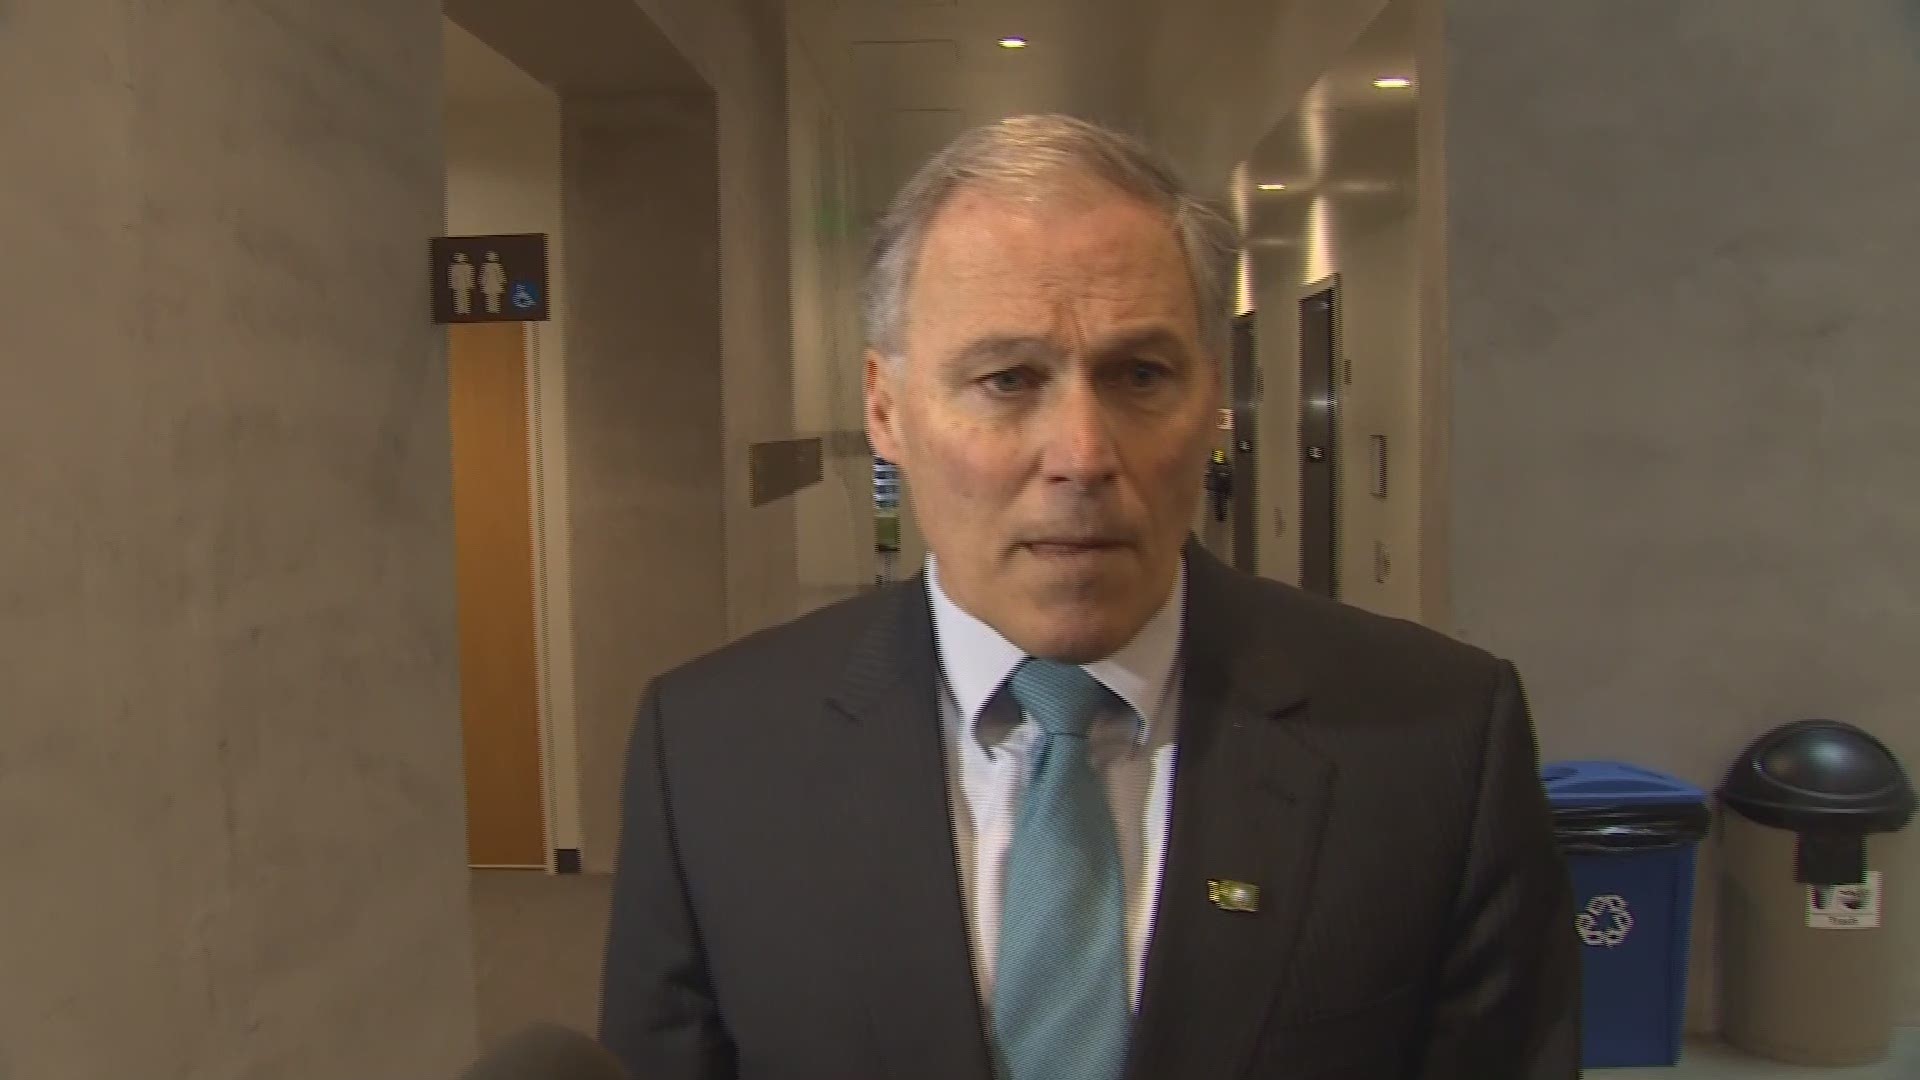 Gov. Jay Inslee answers questions on February 27, 2019 on whether he has an announcement to make about a possible presidential run in 2020.